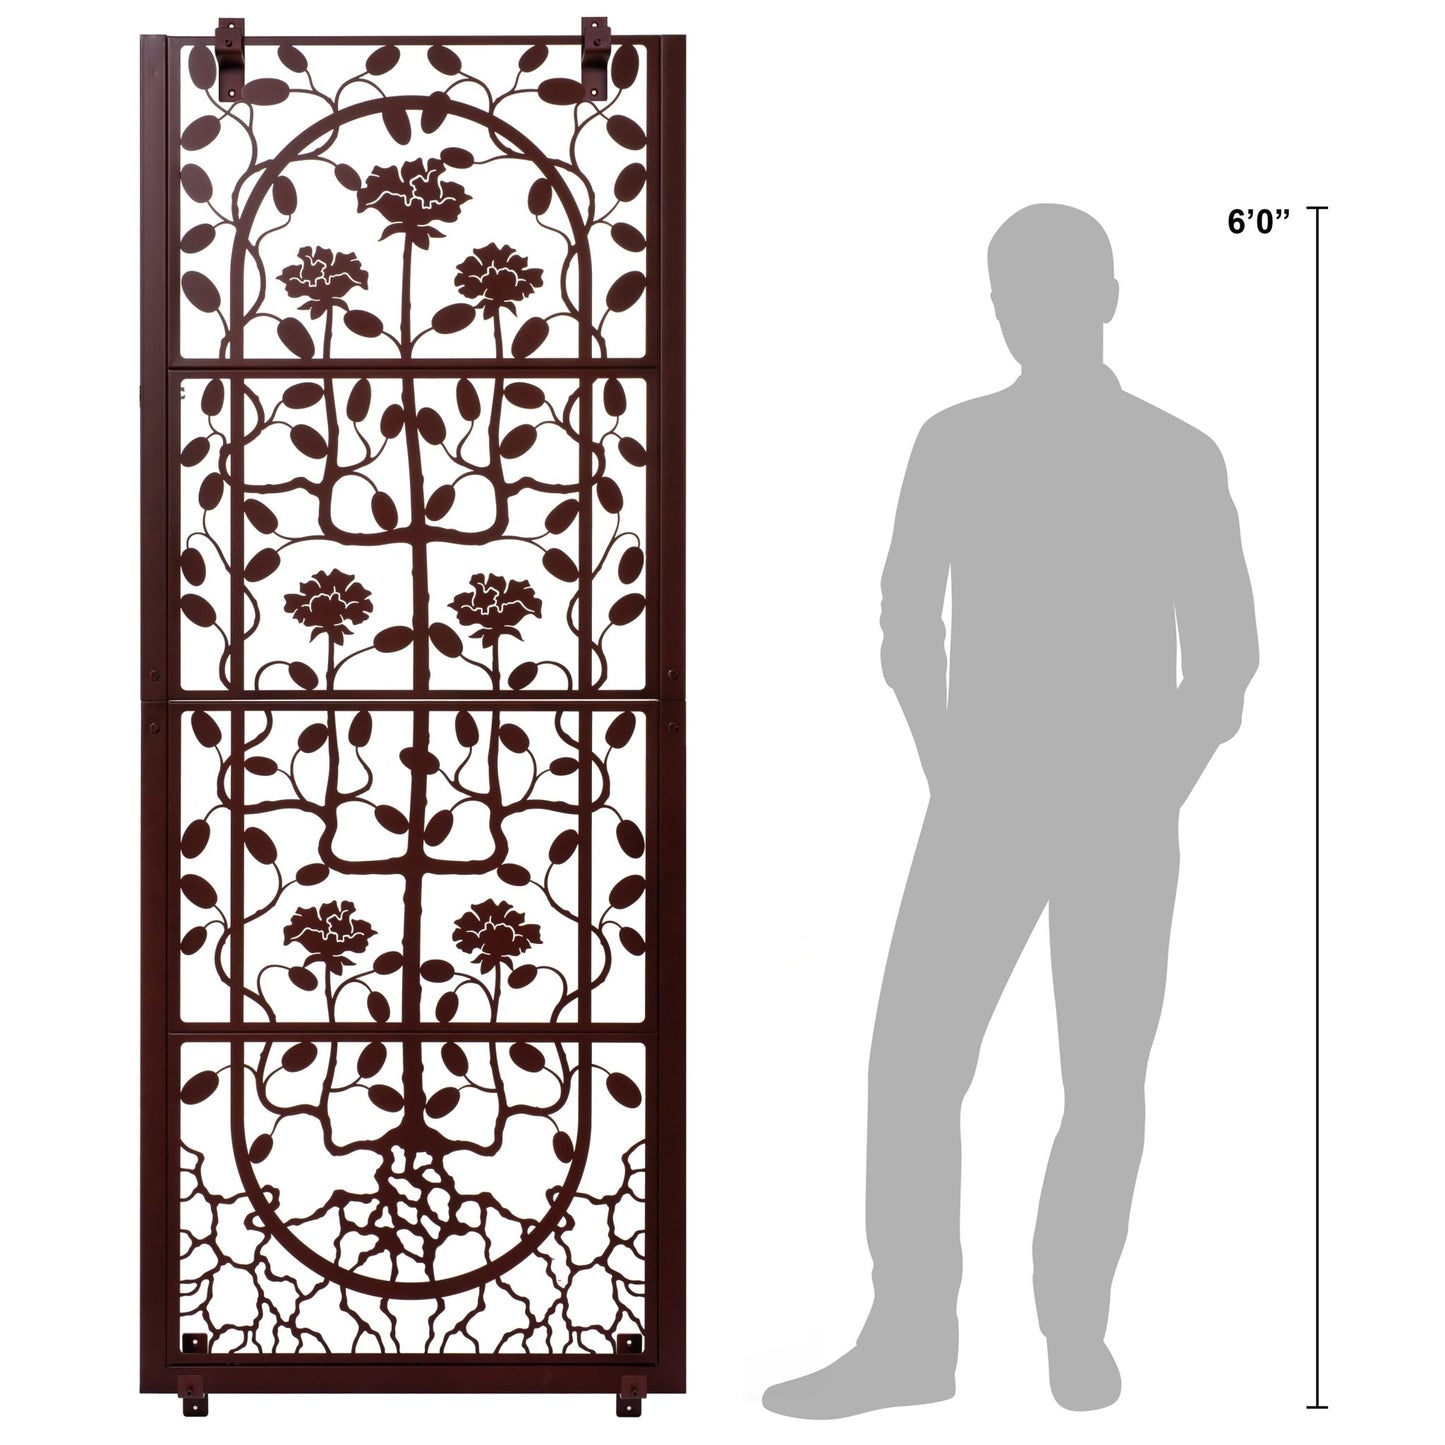 H Potter Wall Trellis Decorative Privacy Screen for Climbing Plants â Outdoor/Indoor Metal Art Pane